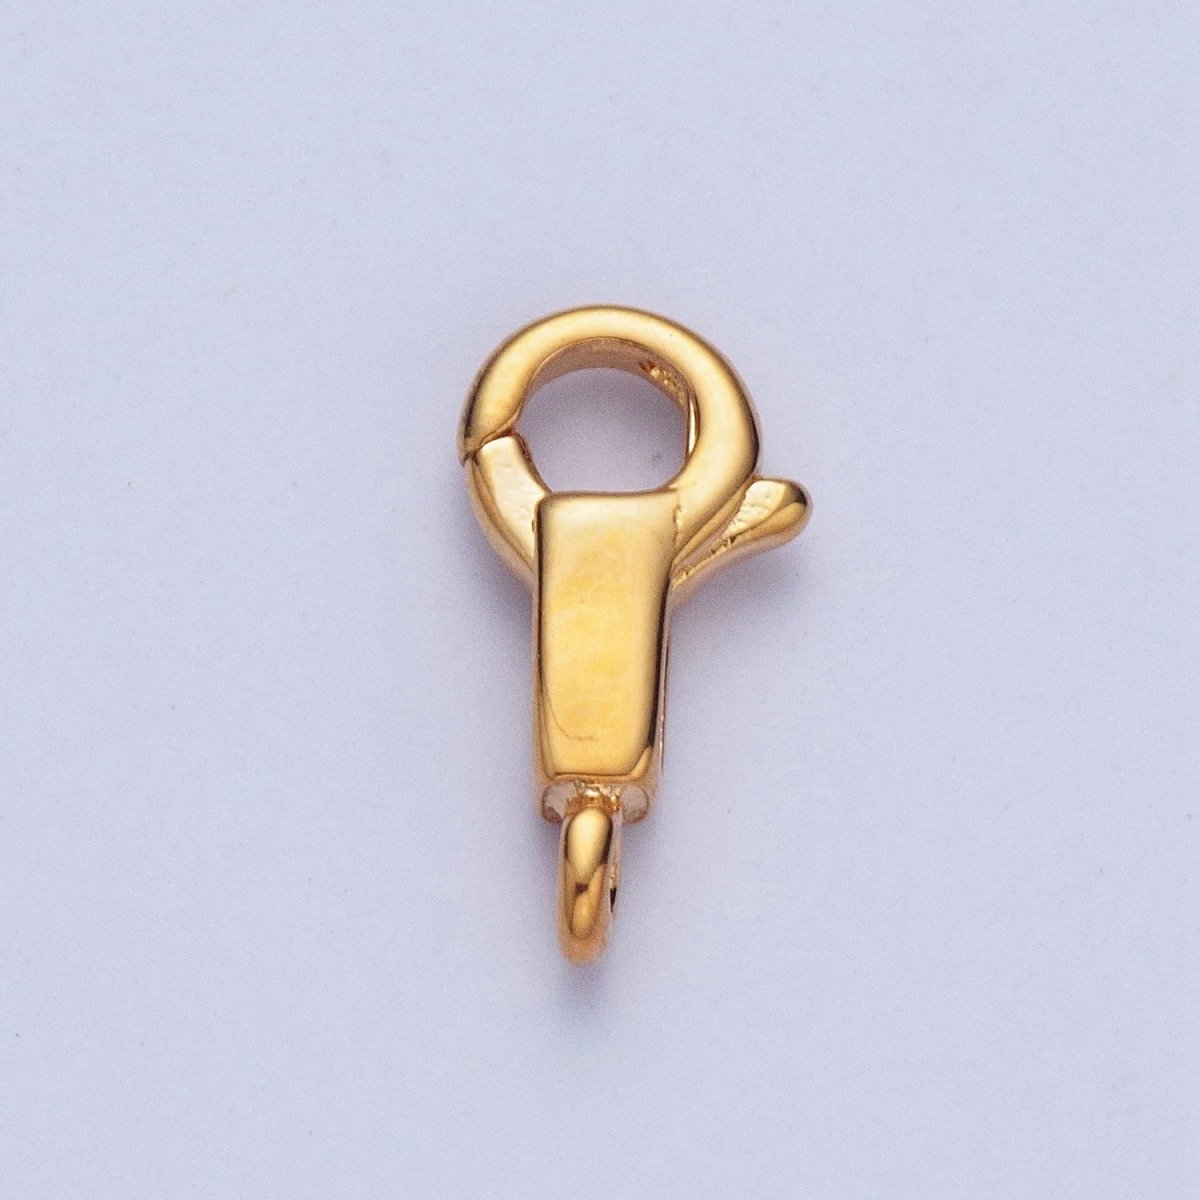 Gold Filled Long Body Lobster Clasps Supply, Round Spring Ring Head with Rectangular Body Closure Jewelry Supply L-870 L-871 L-918 - DLUXCA